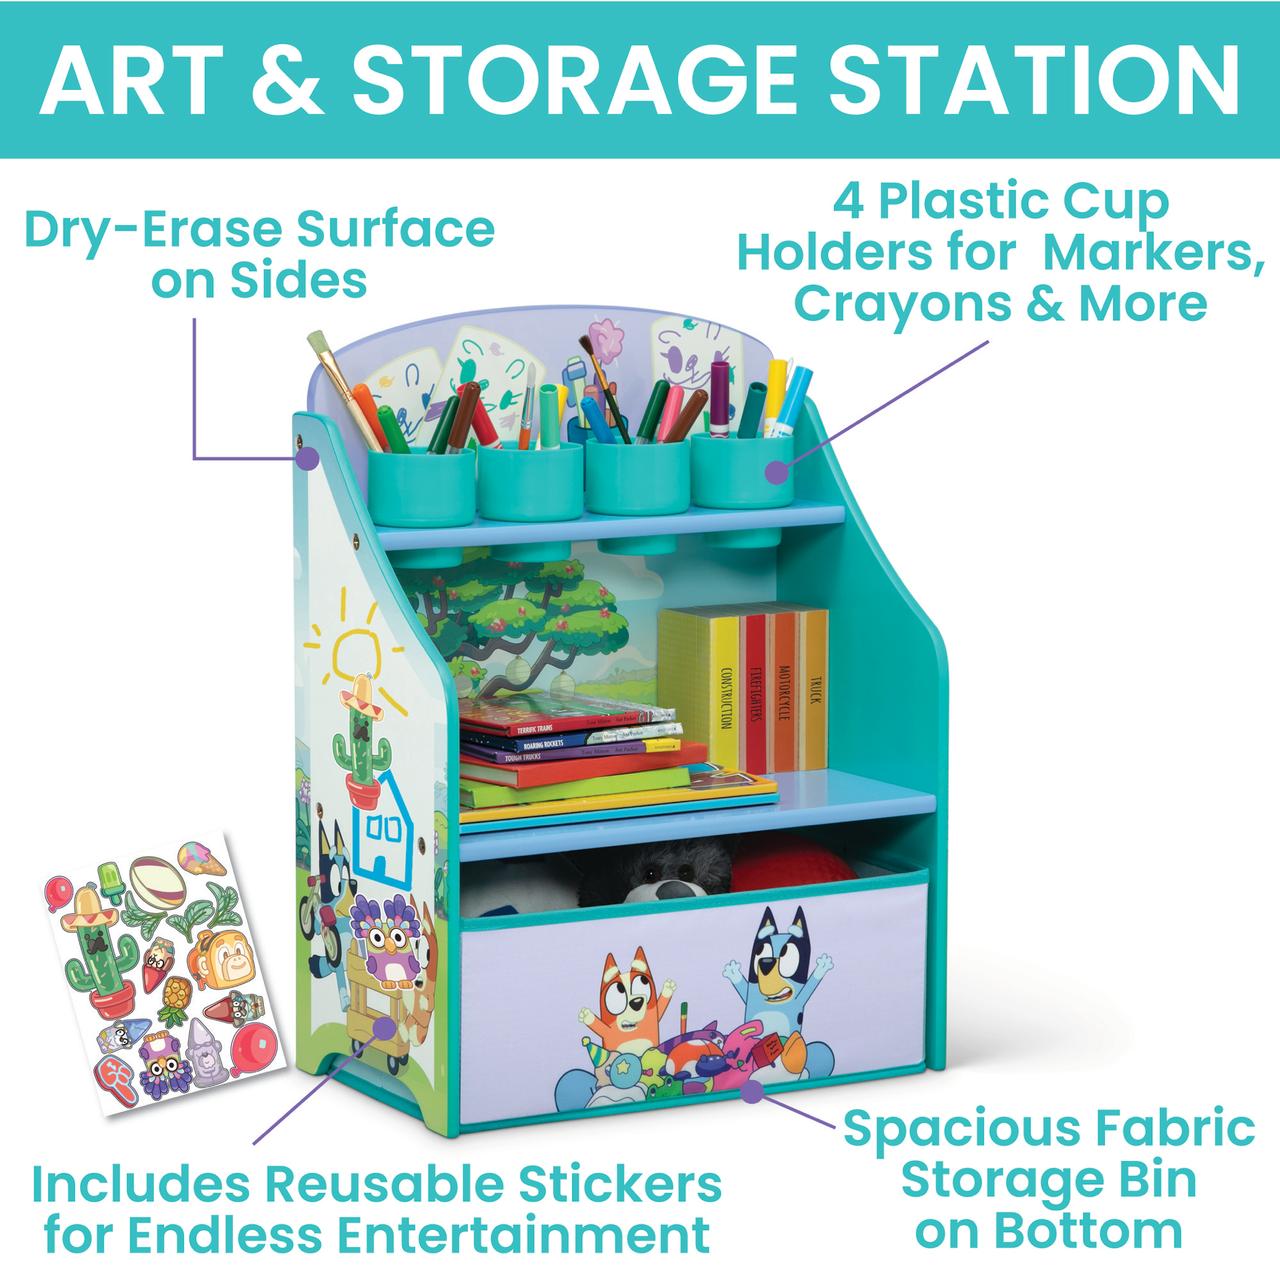 Bluey 3-Piece Art & Play Toddler Room-in-a-Box by Delta Children – Includes Draw & Play Desk, Art & Storage Station & Fabric Toy Box, Blue - image 5 of 11